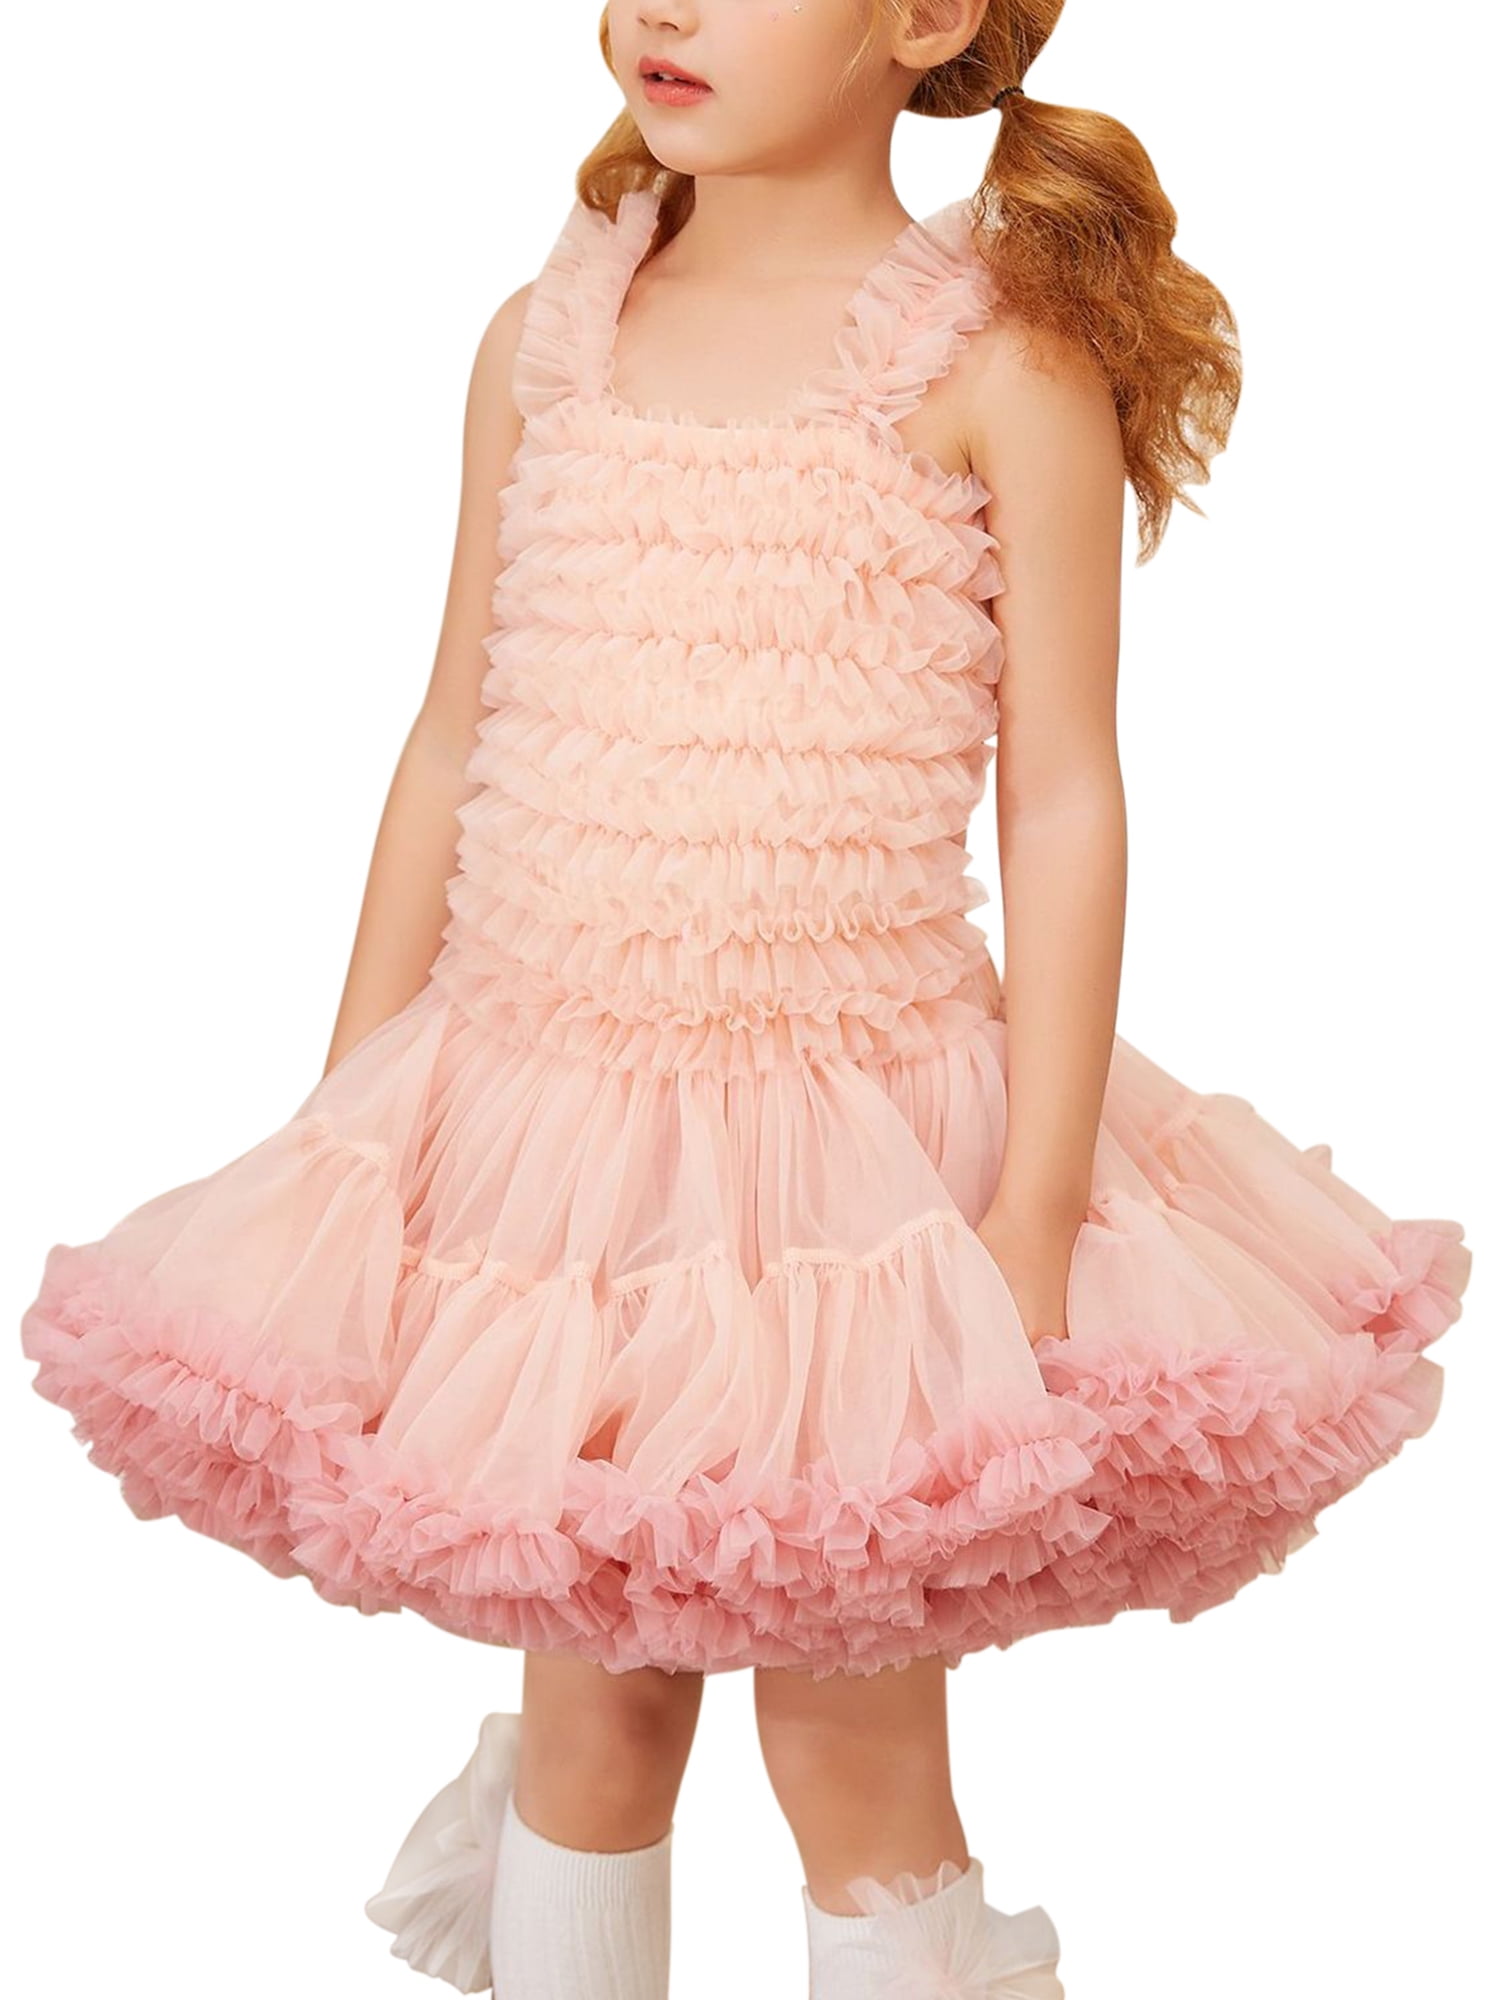 Baby Girls Floral Lace Princess Wedding Bridesmaid Pageant Party Tutu Gown Dress